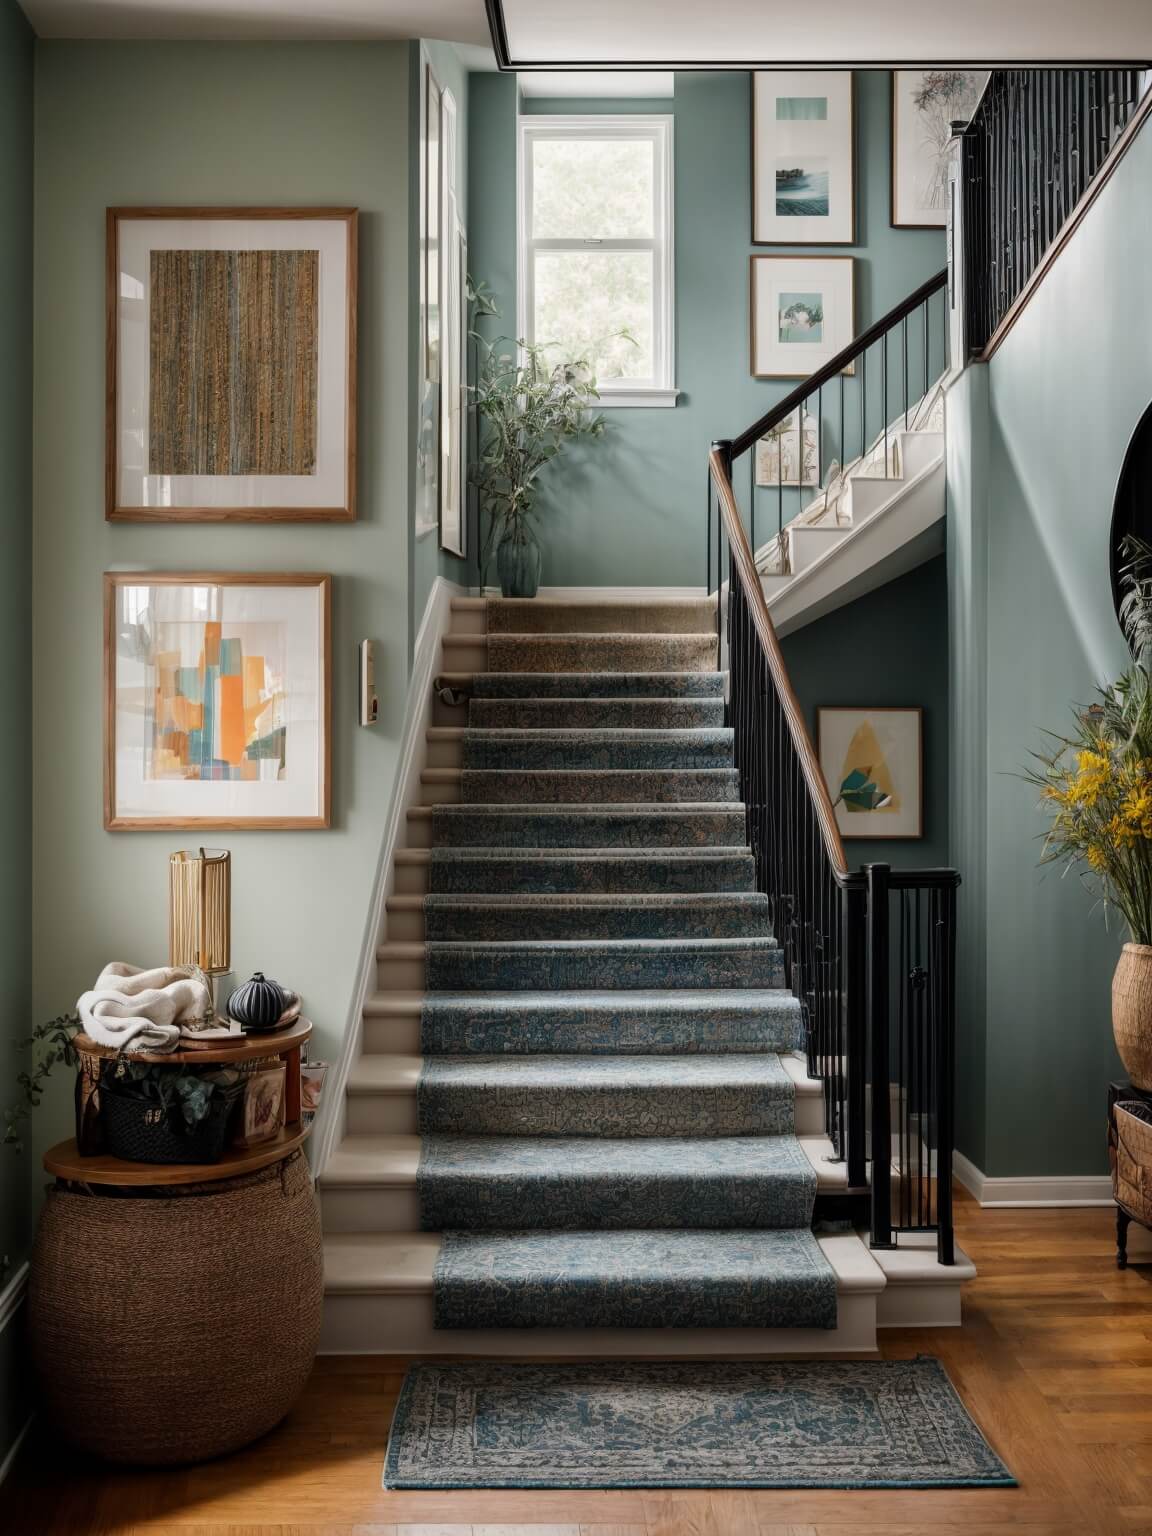 Basement Stairwell Ideas Decor Elevating the Ordinary to Extraordinary